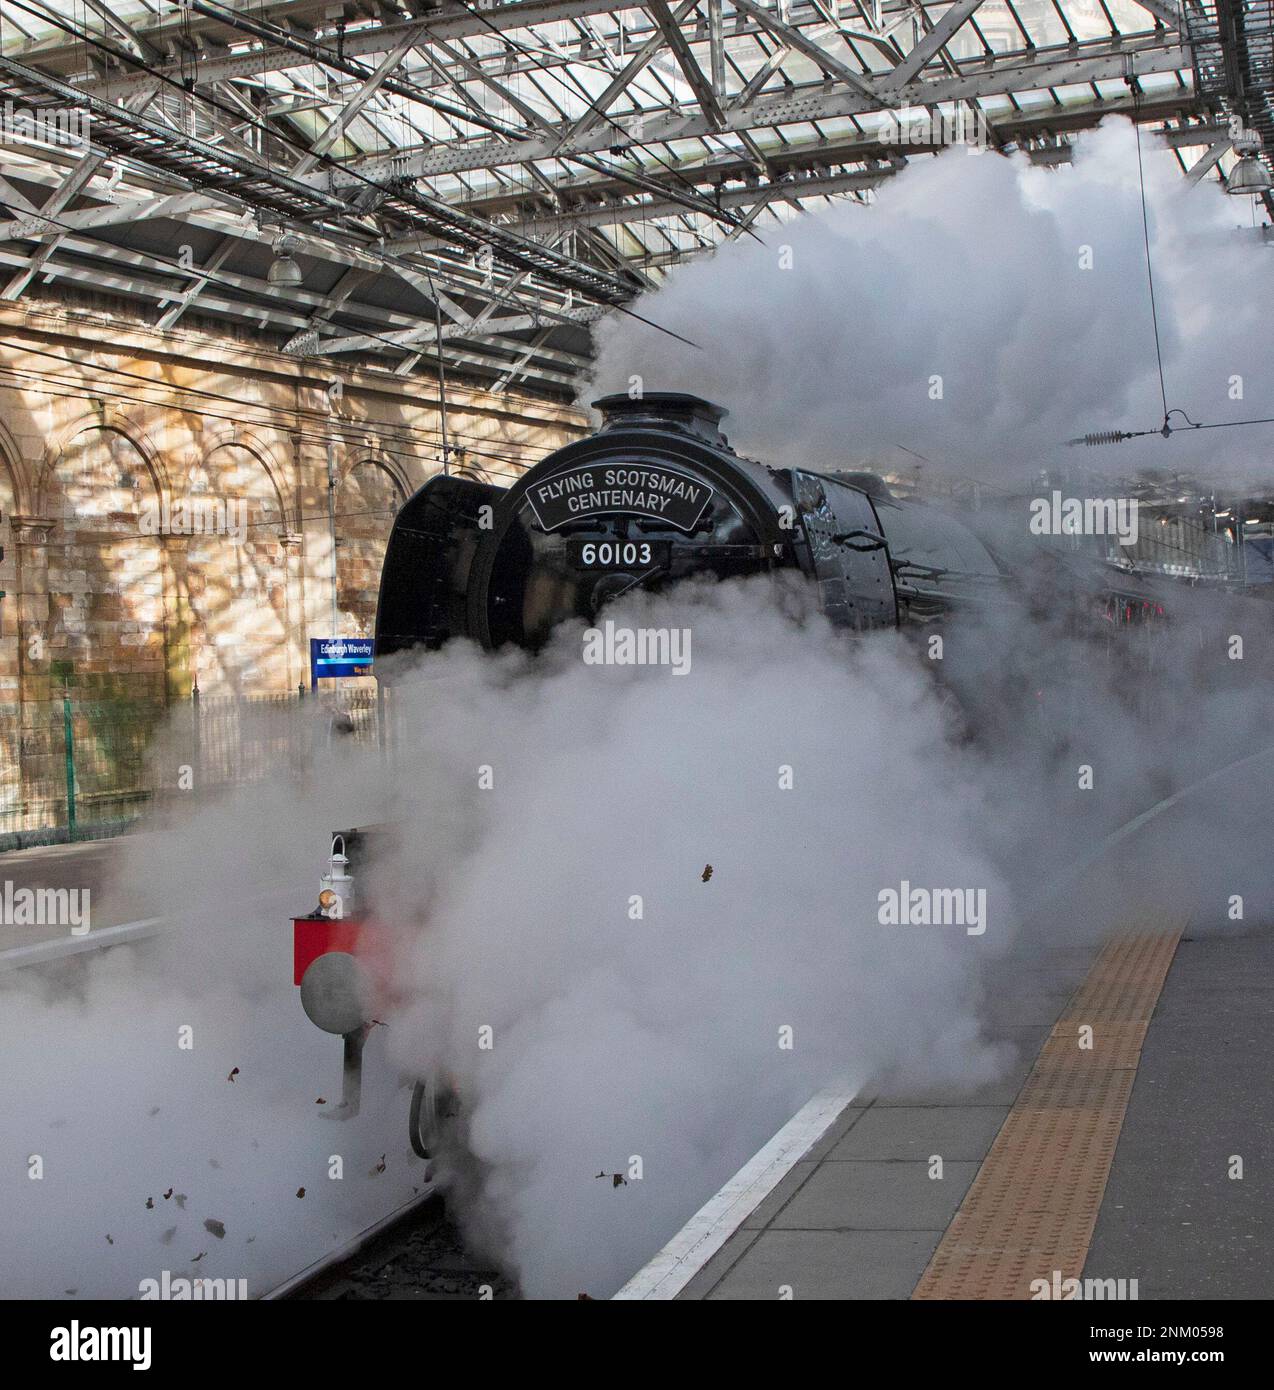 Edinburgh, Scotland, UK. 24 February 2023. The Flying Scotsman Centenary steam engine leaves Edinburgh Waverley after a reception for invited guests, celebrating 100 years of the golden age of British ingenuity, invention and craftmanship. Credit: Archwhite/alamy live news. Stock Photo